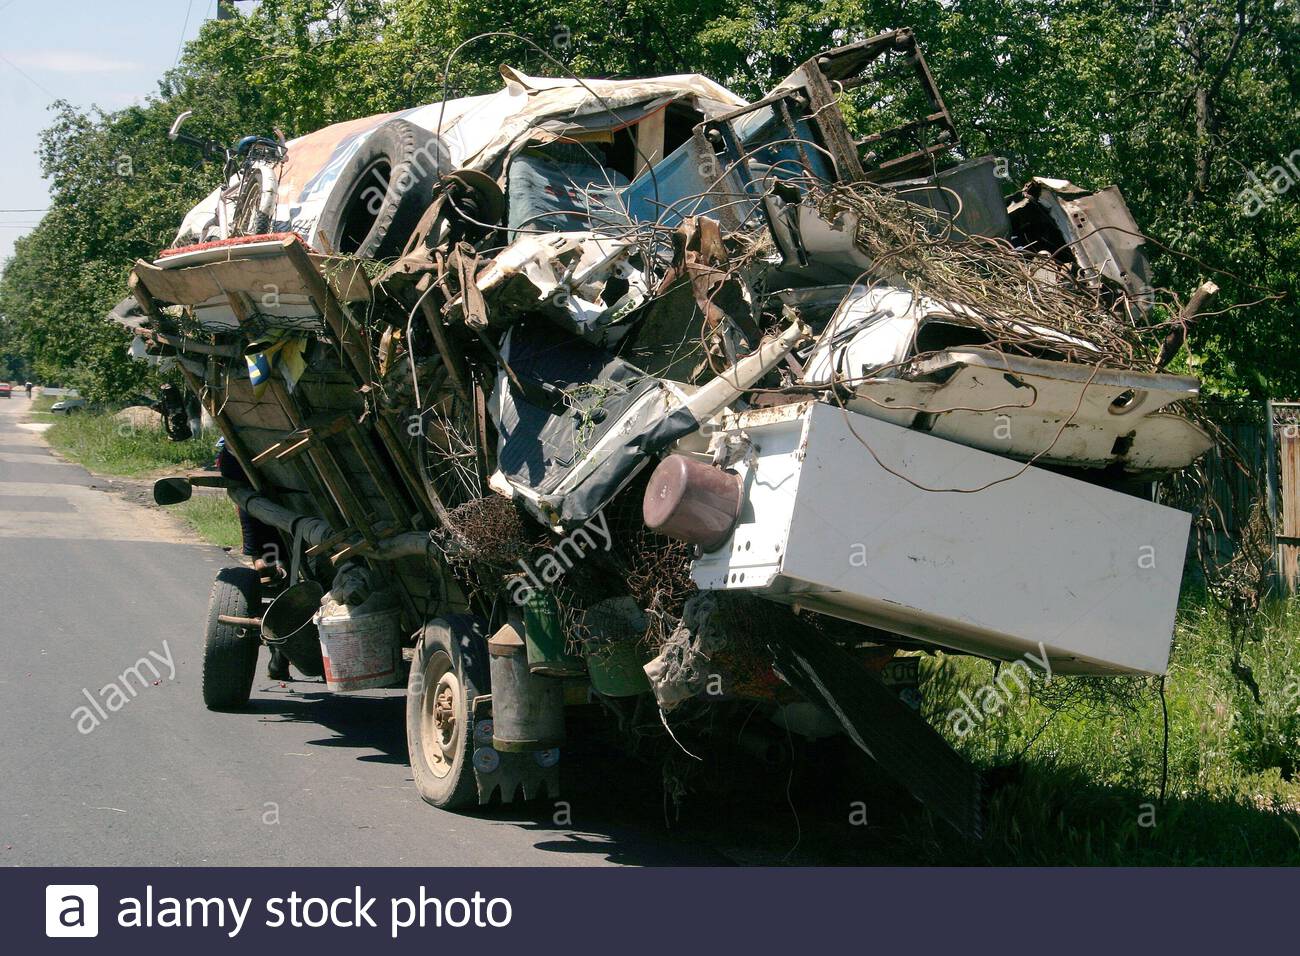 cart-overfilled-with-scrap-metal-collected-by-the-gypsies-in-romania-to-be-sold-for-some-cash-...jpg